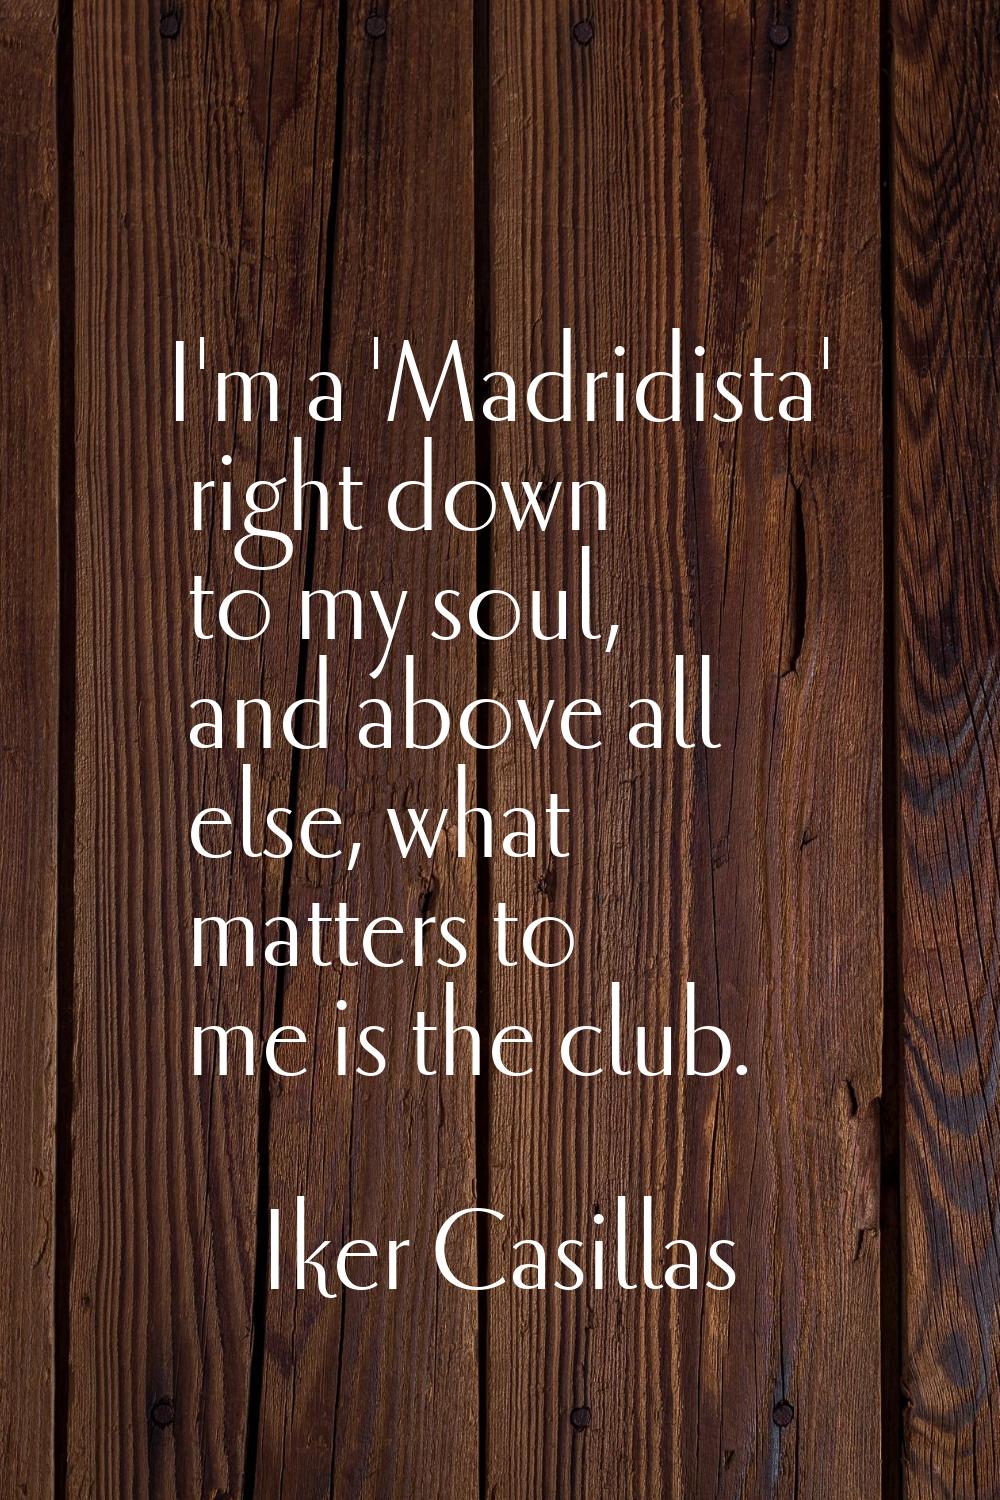 I'm a 'Madridista' right down to my soul, and above all else, what matters to me is the club.